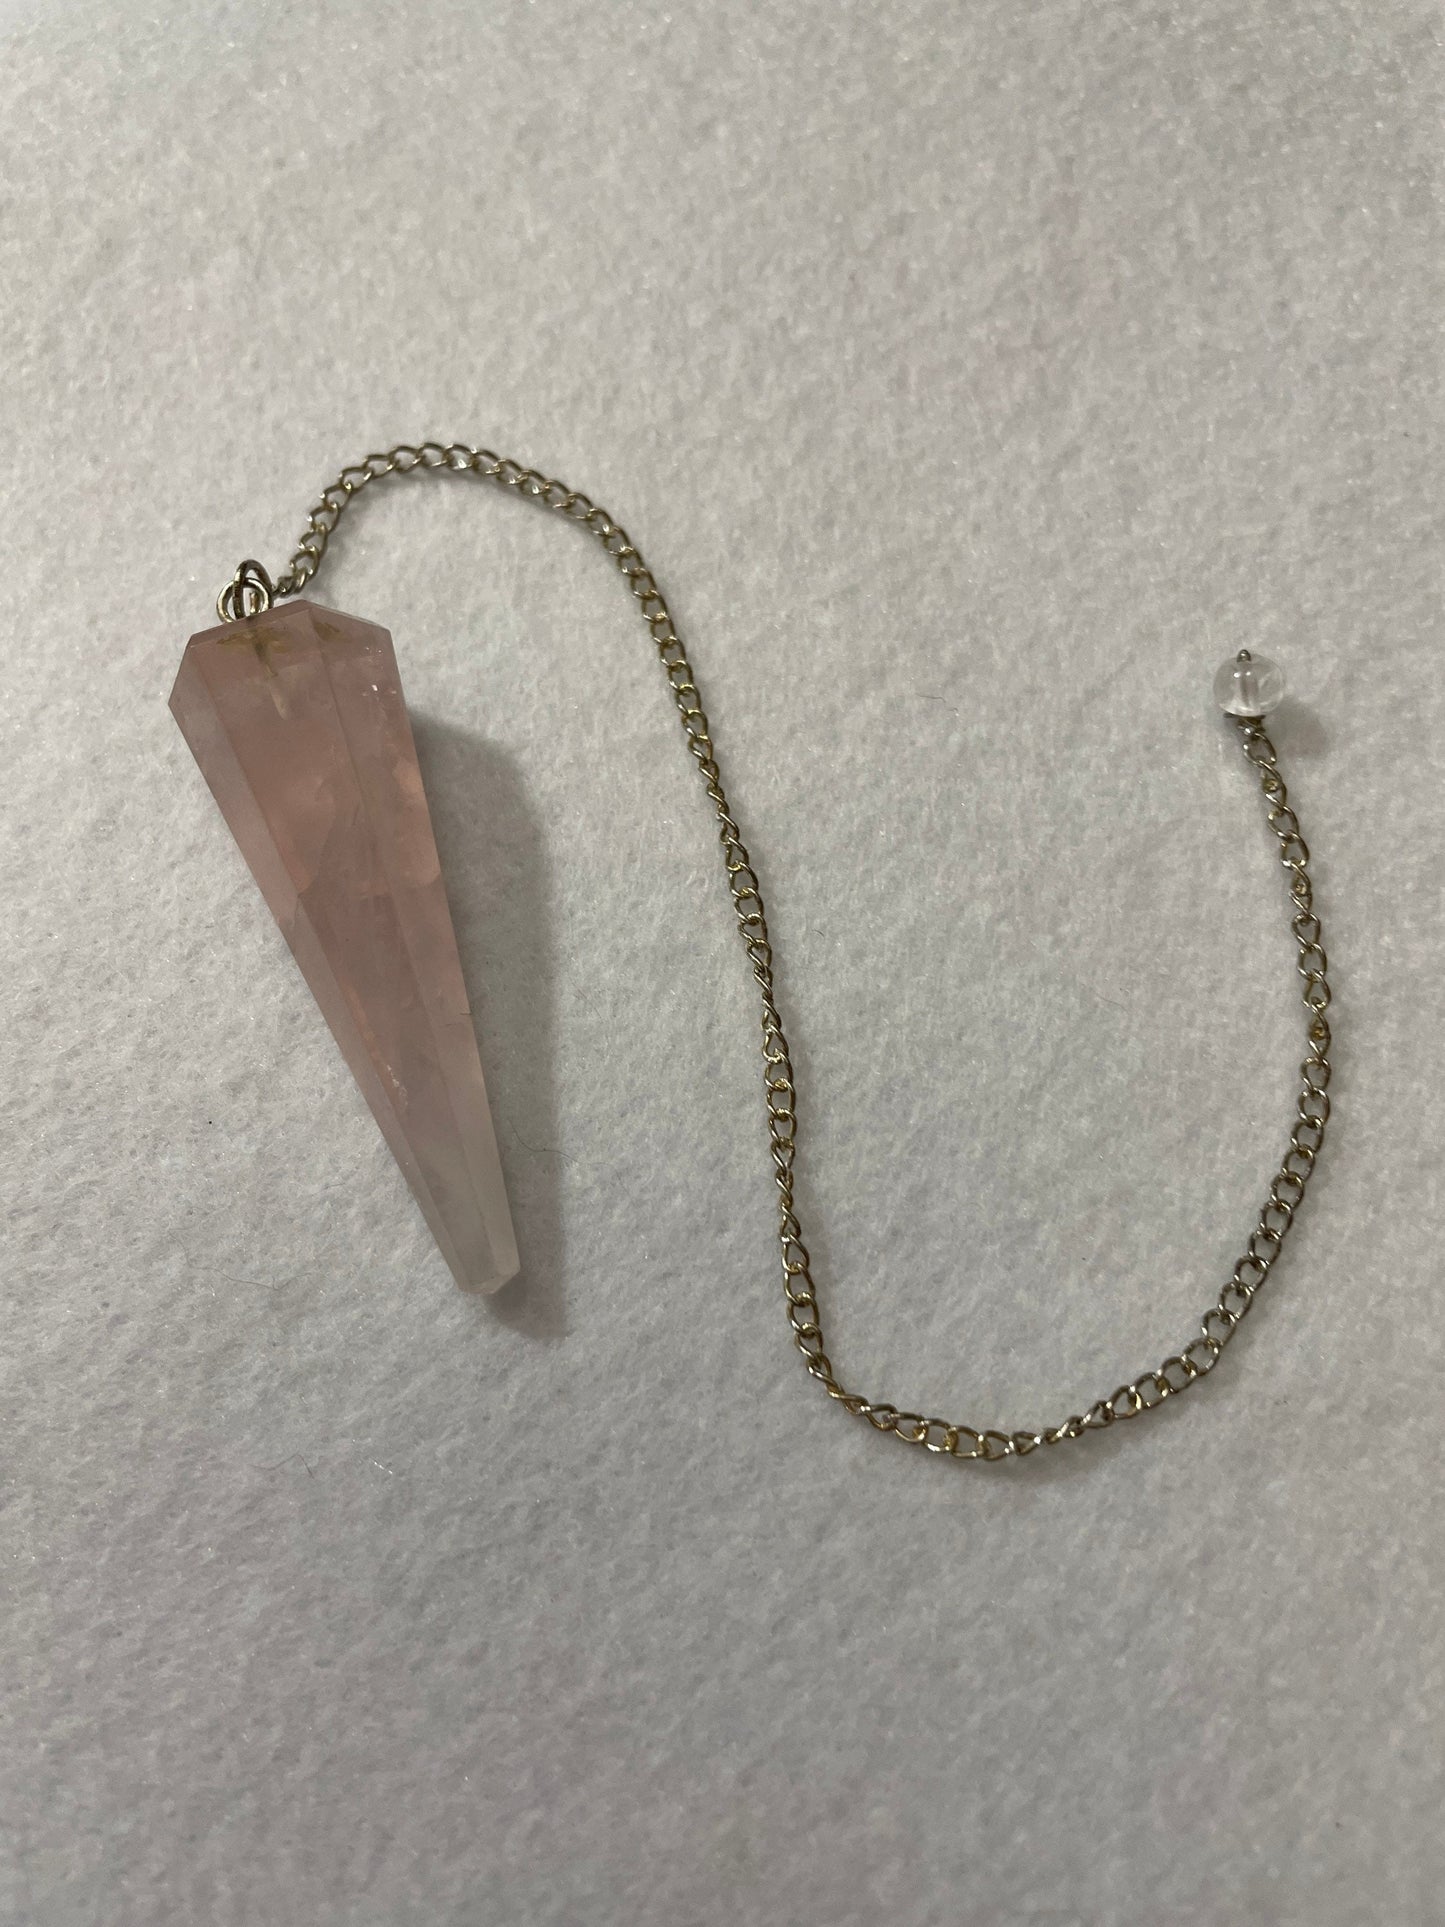 This beautiful Rose Quartz Pendulum is  1.75” and with chain is 8.75”